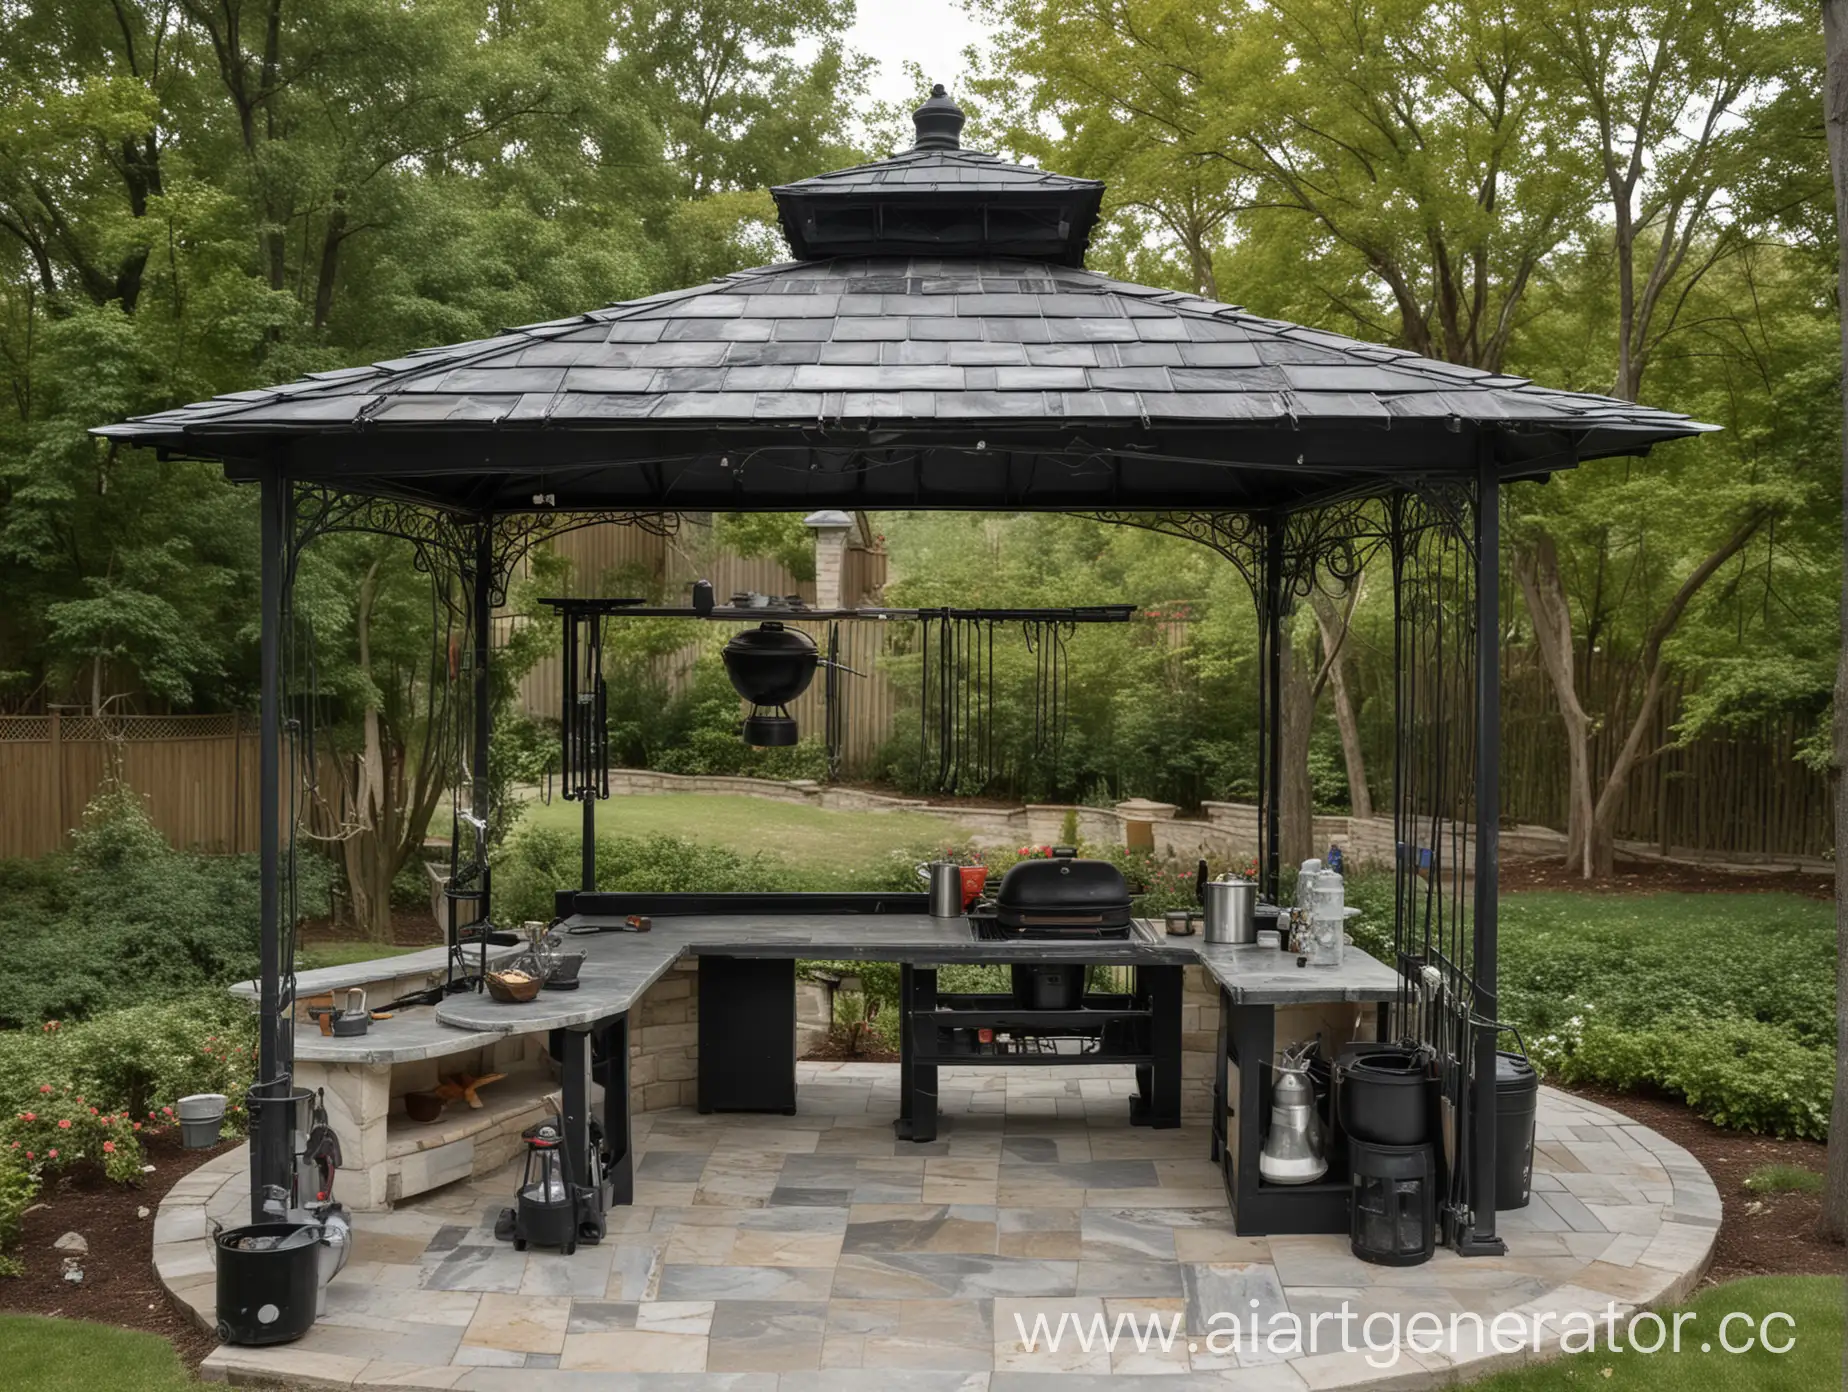 Scenario:  Digital photo. The barbecue complex looks like a black gazebo, stands with the letter U on 8 legs. With three plates on the roof. The table is built into the entire width of the gazebo, on the right side there is a cauldron, in the far corner there is a sink and at the top there is a spider with a web, on the left side there is a wide barbecue. On the back side of the gazebo there are two crossbars for hanging tools for the barbecue and dishes. The gazebo stands on gray marble tiles. Under the roof of the gazebo there are twisted balusters on the pillars, at the bottom of the gazebo smaller balusters are installed in a circle. The pipe goes through the roof up from the cauldron.